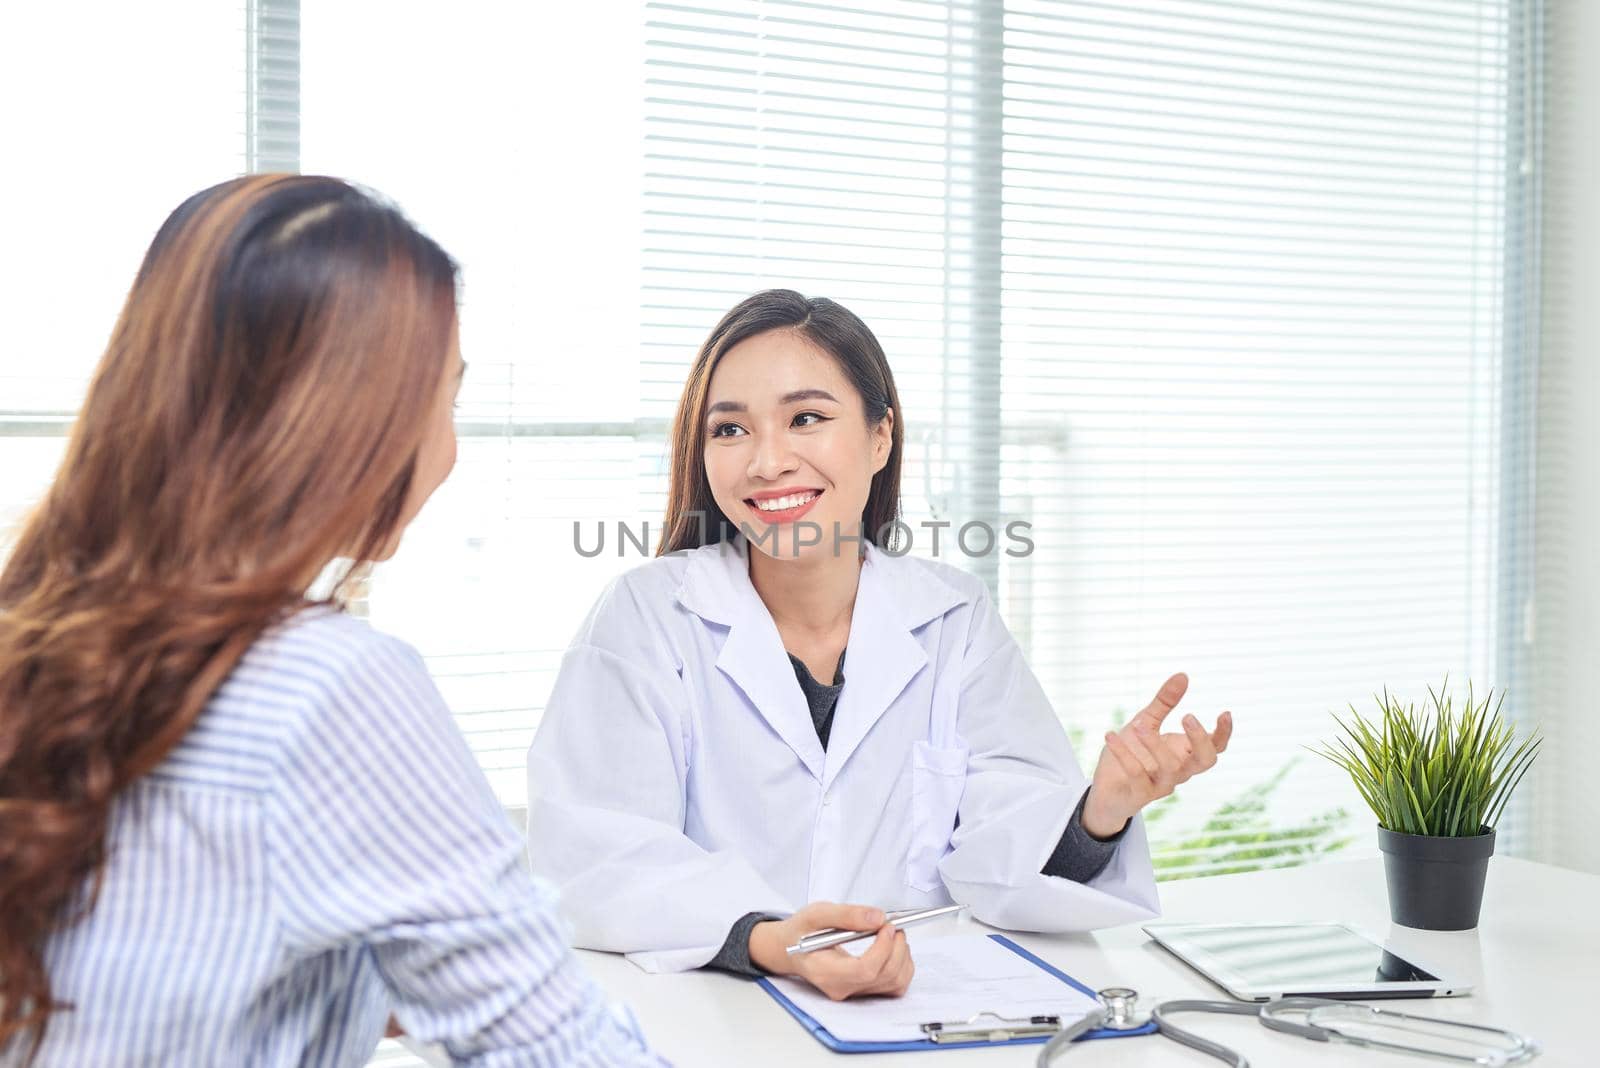 Female doctor talks to female patient in hospital office while writing on the patients health record on the table. Healthcare and medical service. 